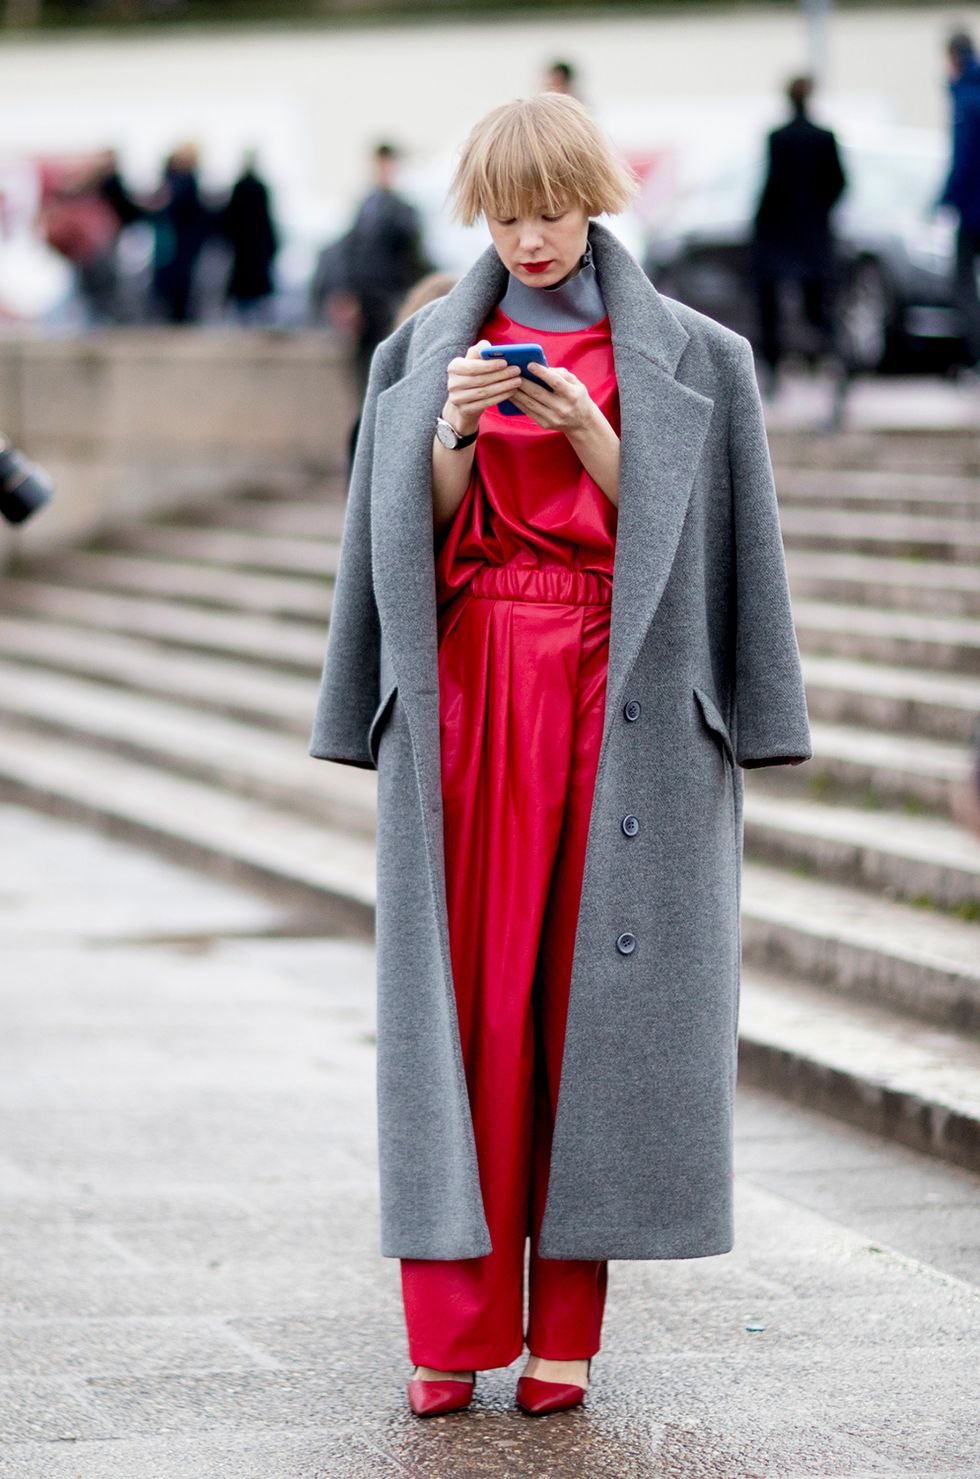 Clothing, Street fashion, Red, Outerwear, Fashion, Coat, Overcoat, Trench coat, Costume, Dress, 